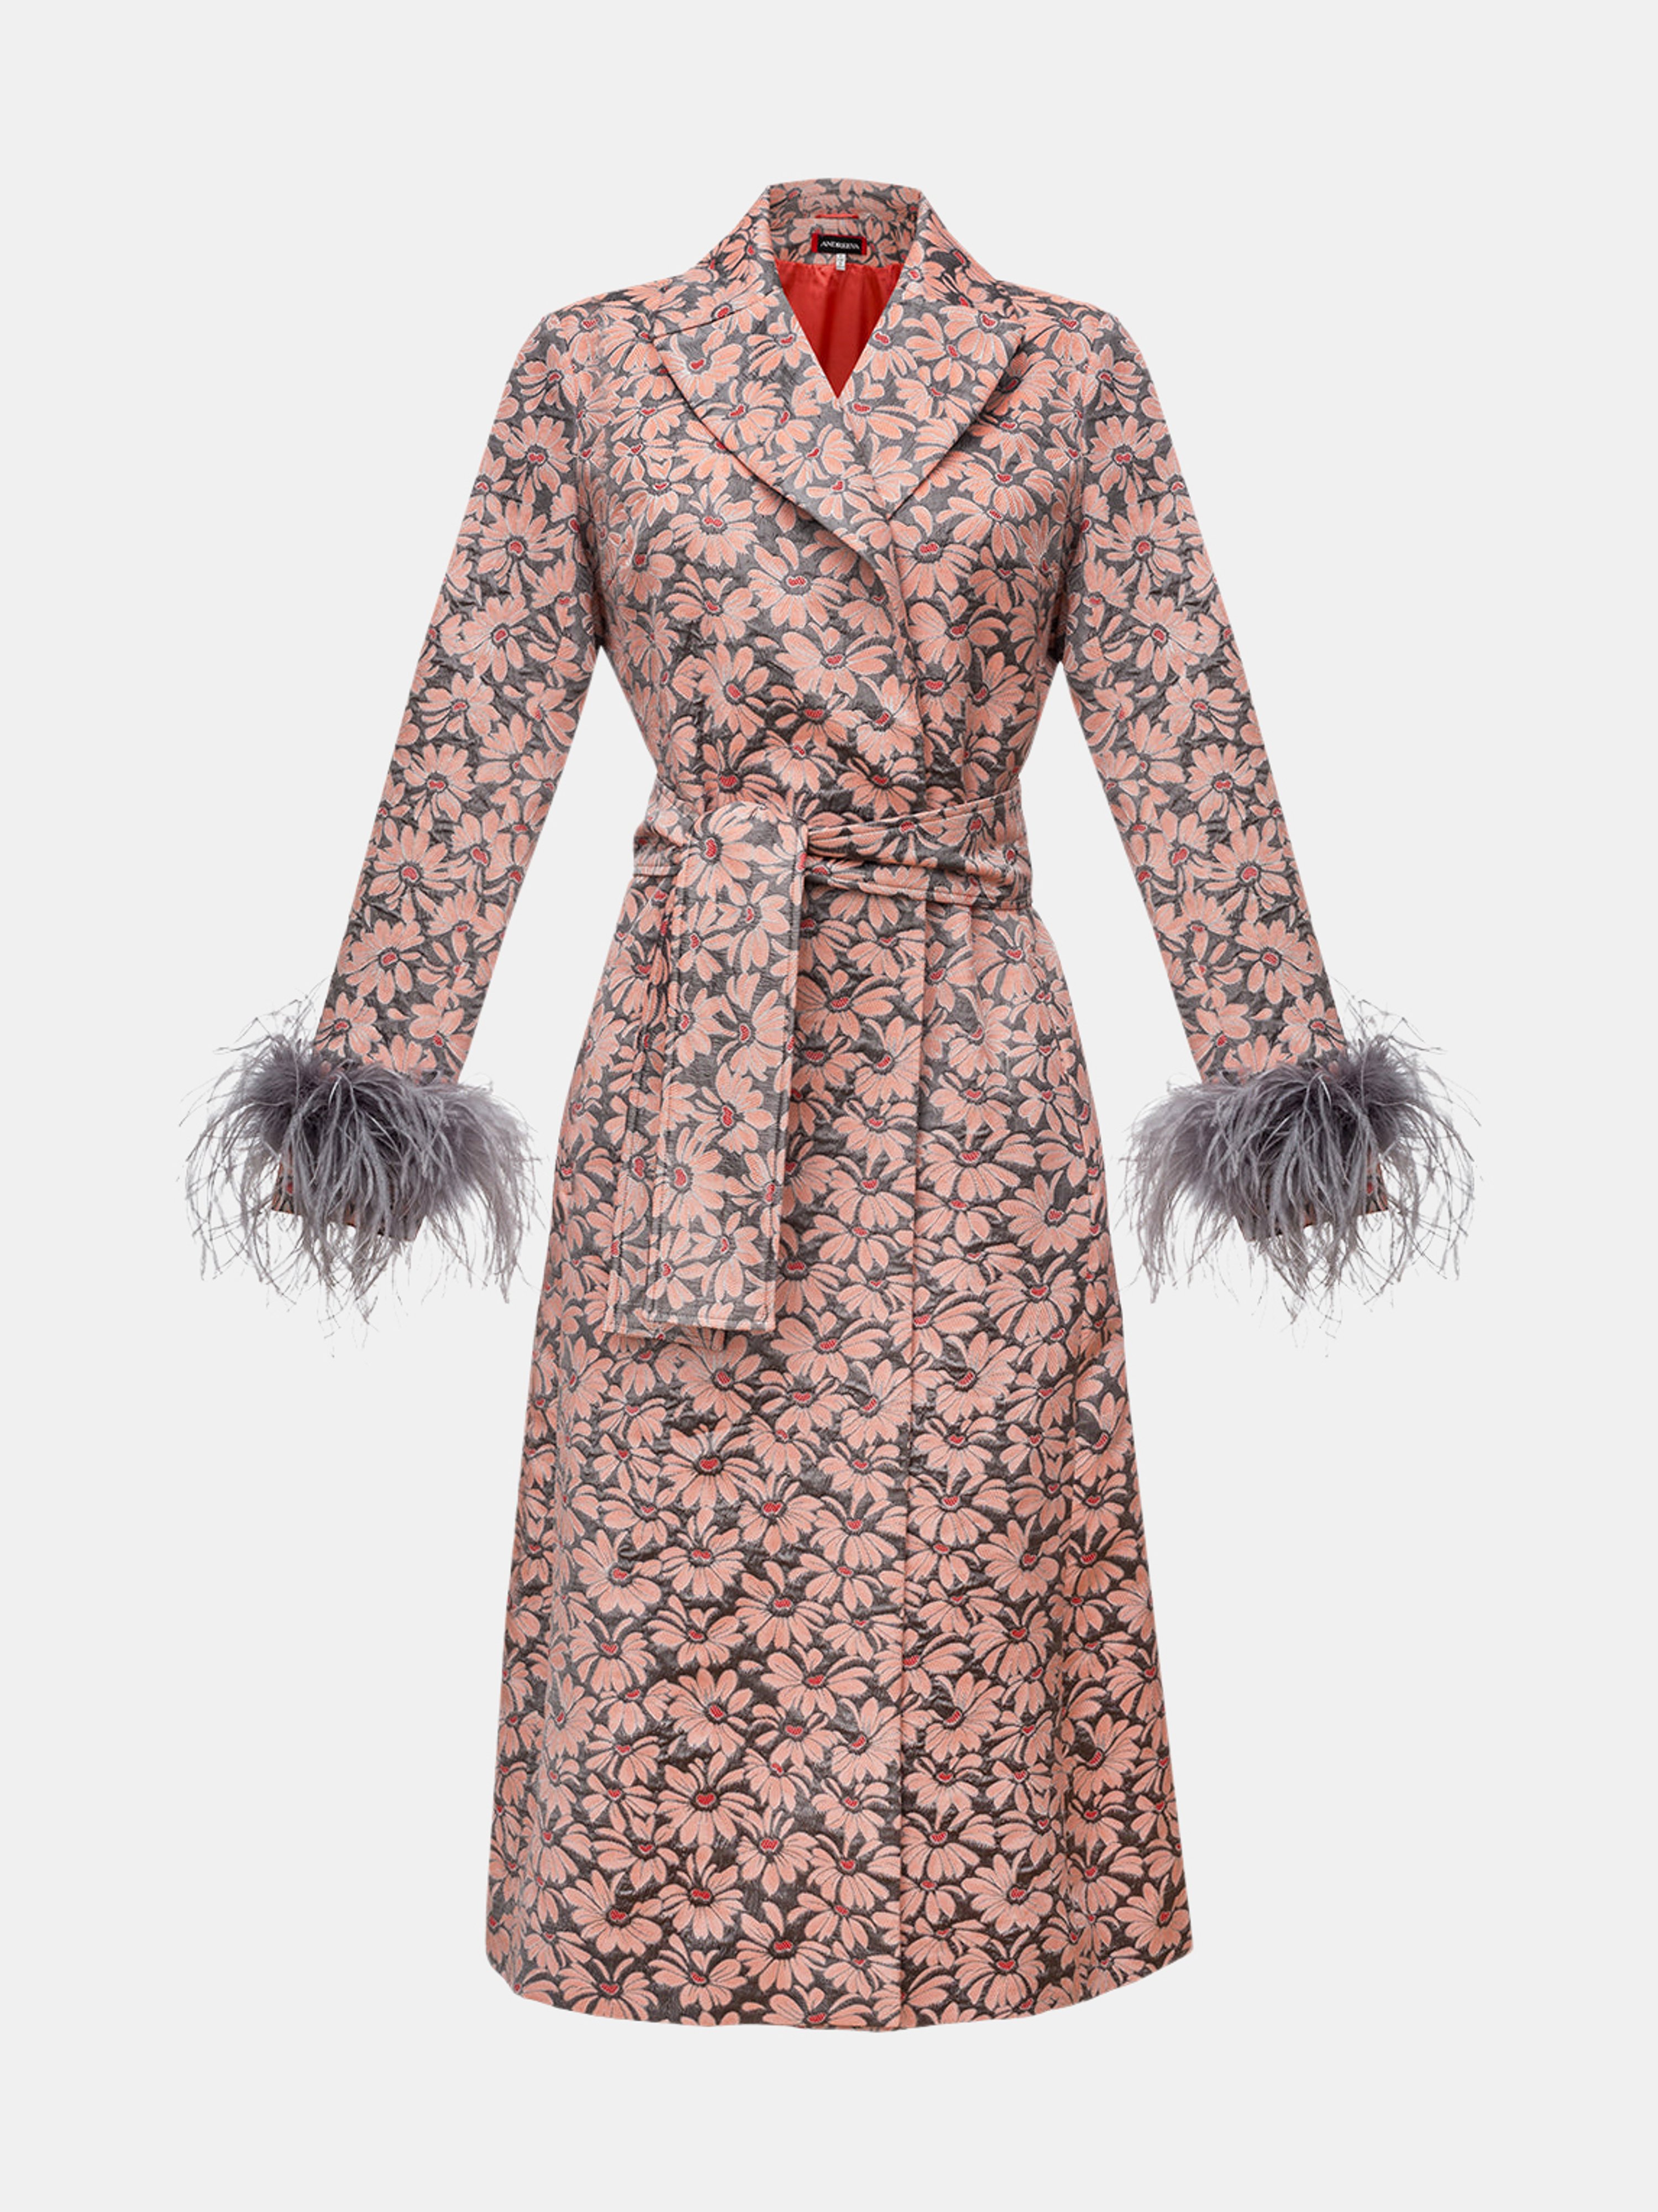 ANDREEVA ANDREEVA JACQUELINE COAT №22 WITH DETACHABLE FEATHERS CUFFS